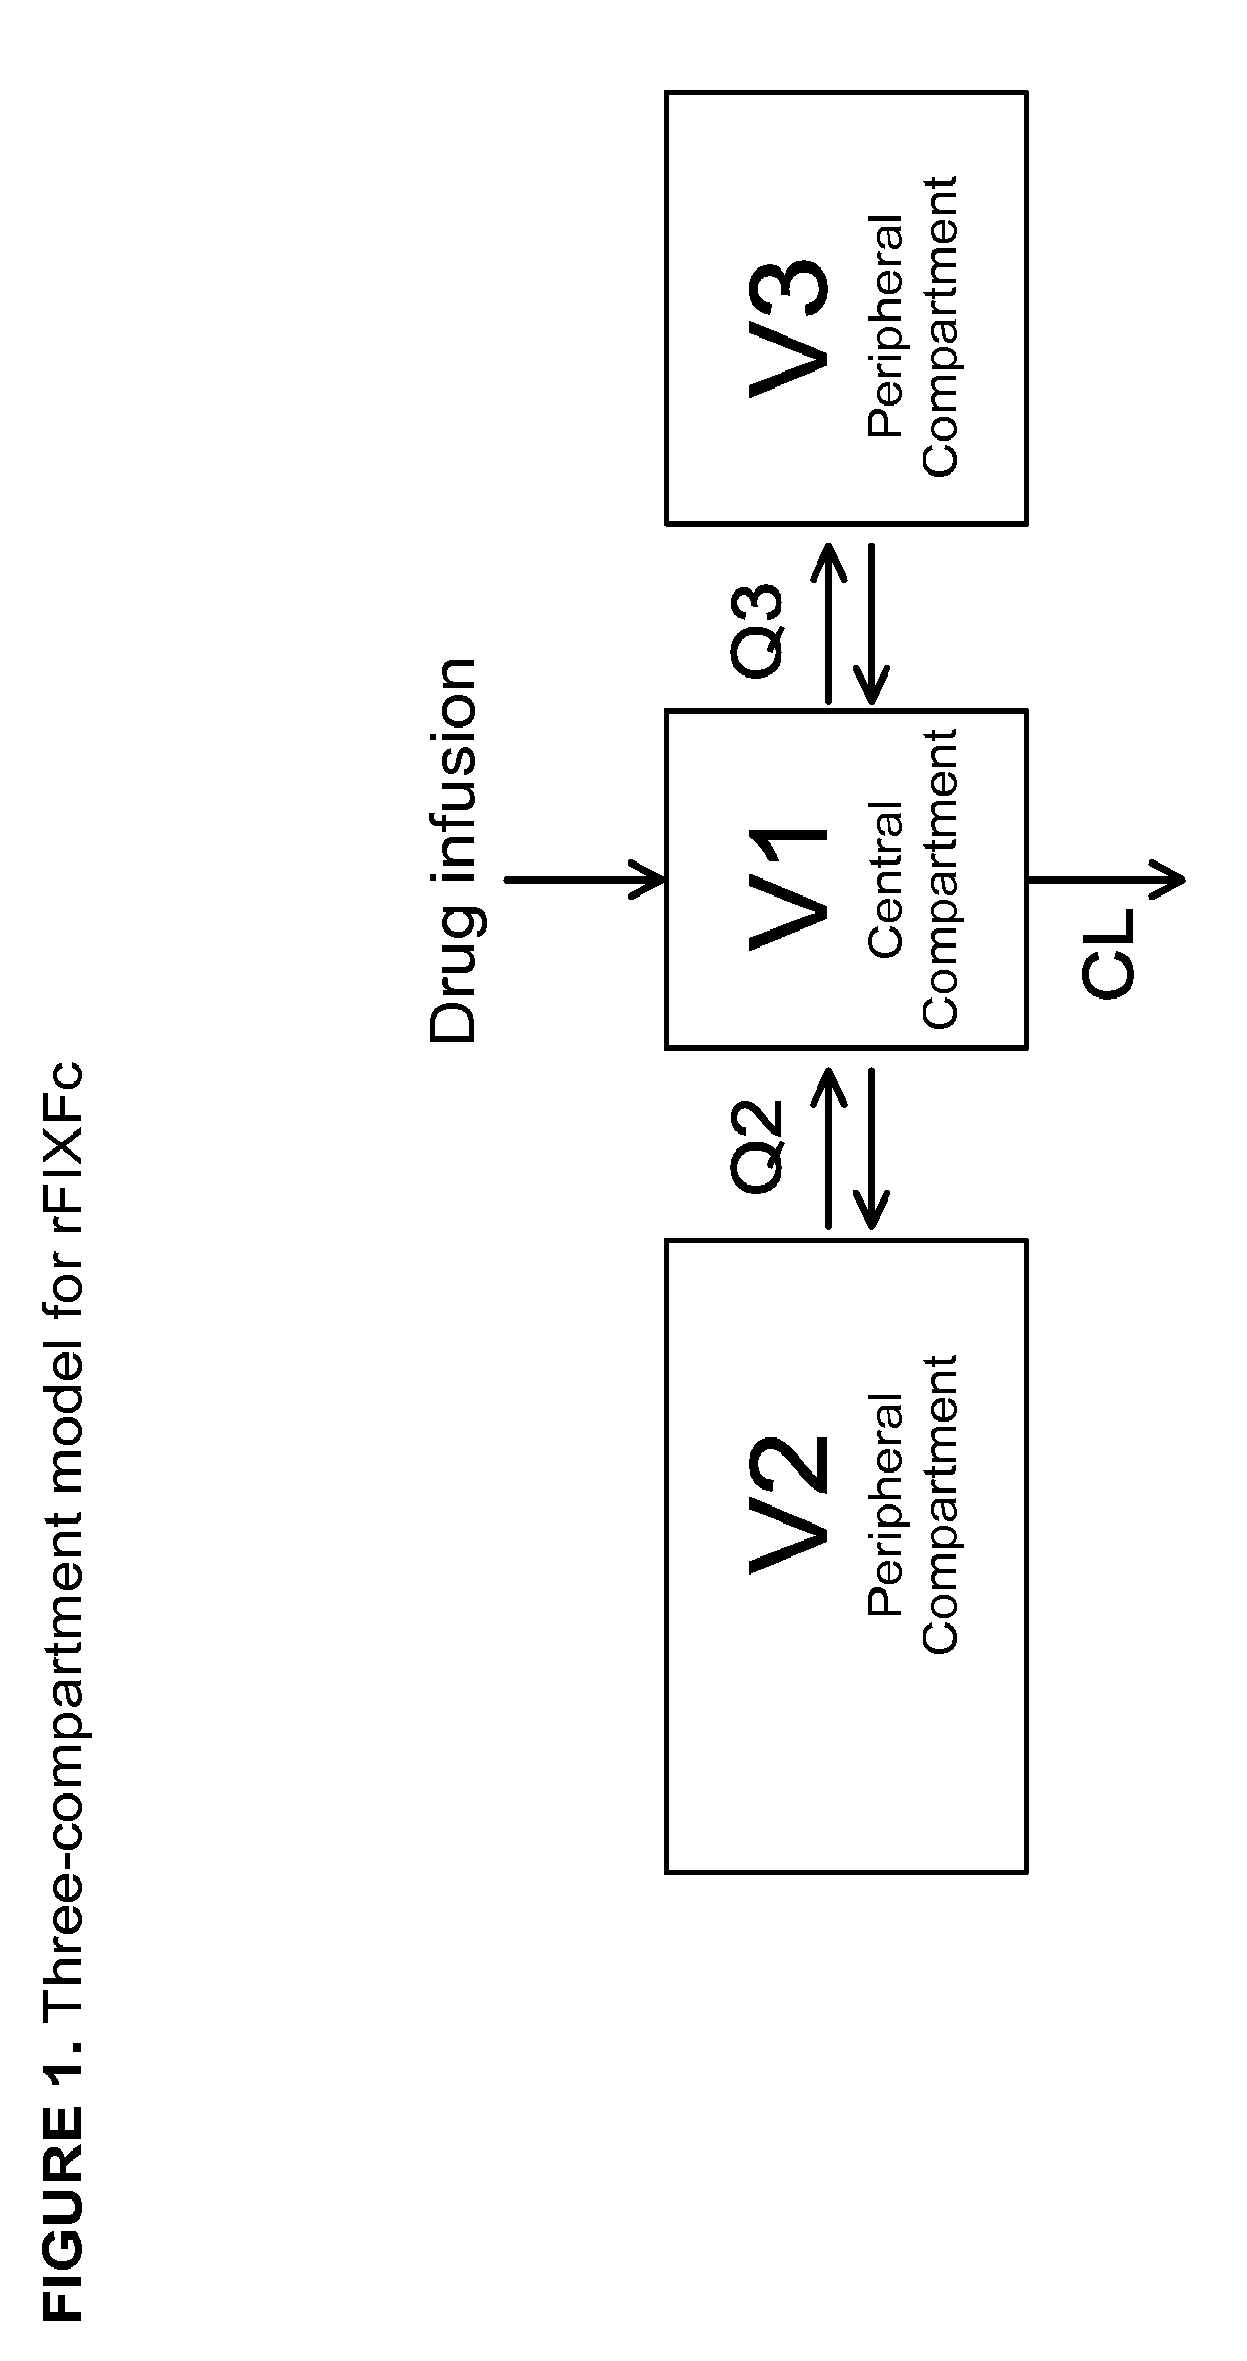 Methods of using a fixed dose of a clotting factor